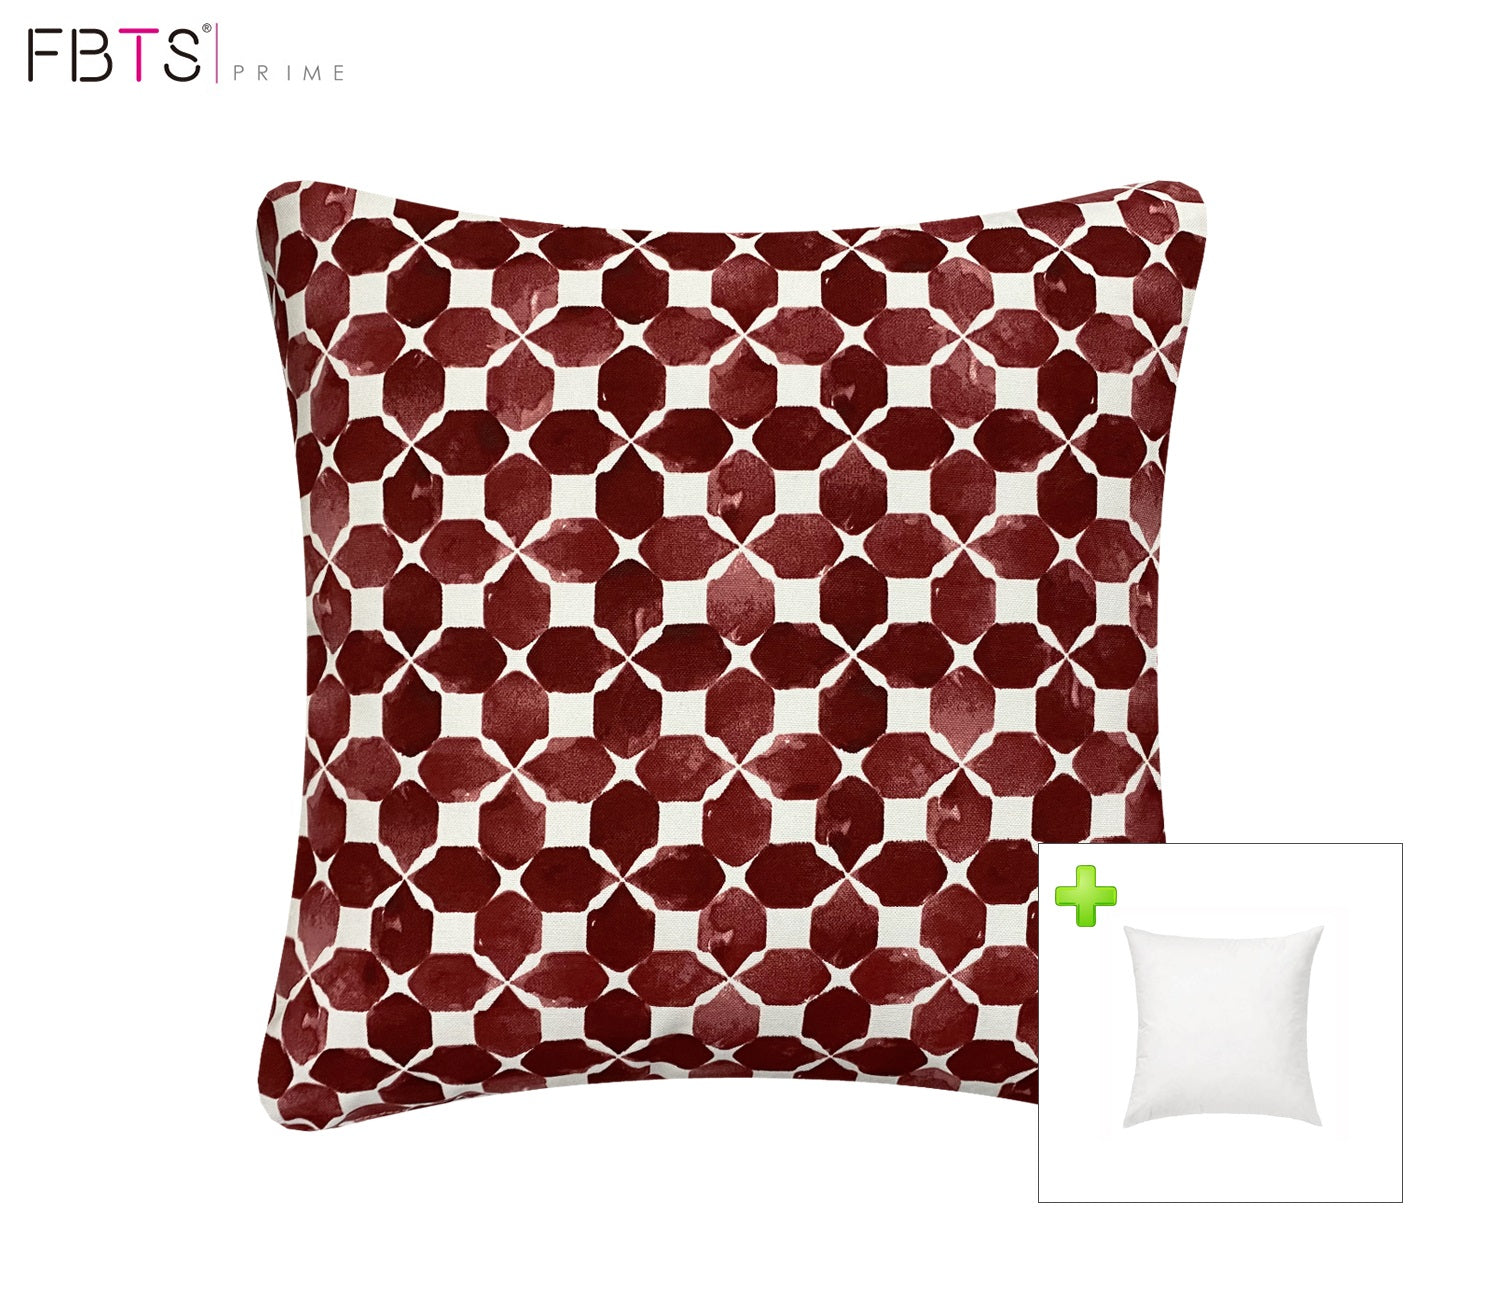 Outdoor Pillows with Insert Red Geometric Patio Accent Throw Pillows 18x18 inch Square Decorative Pillows